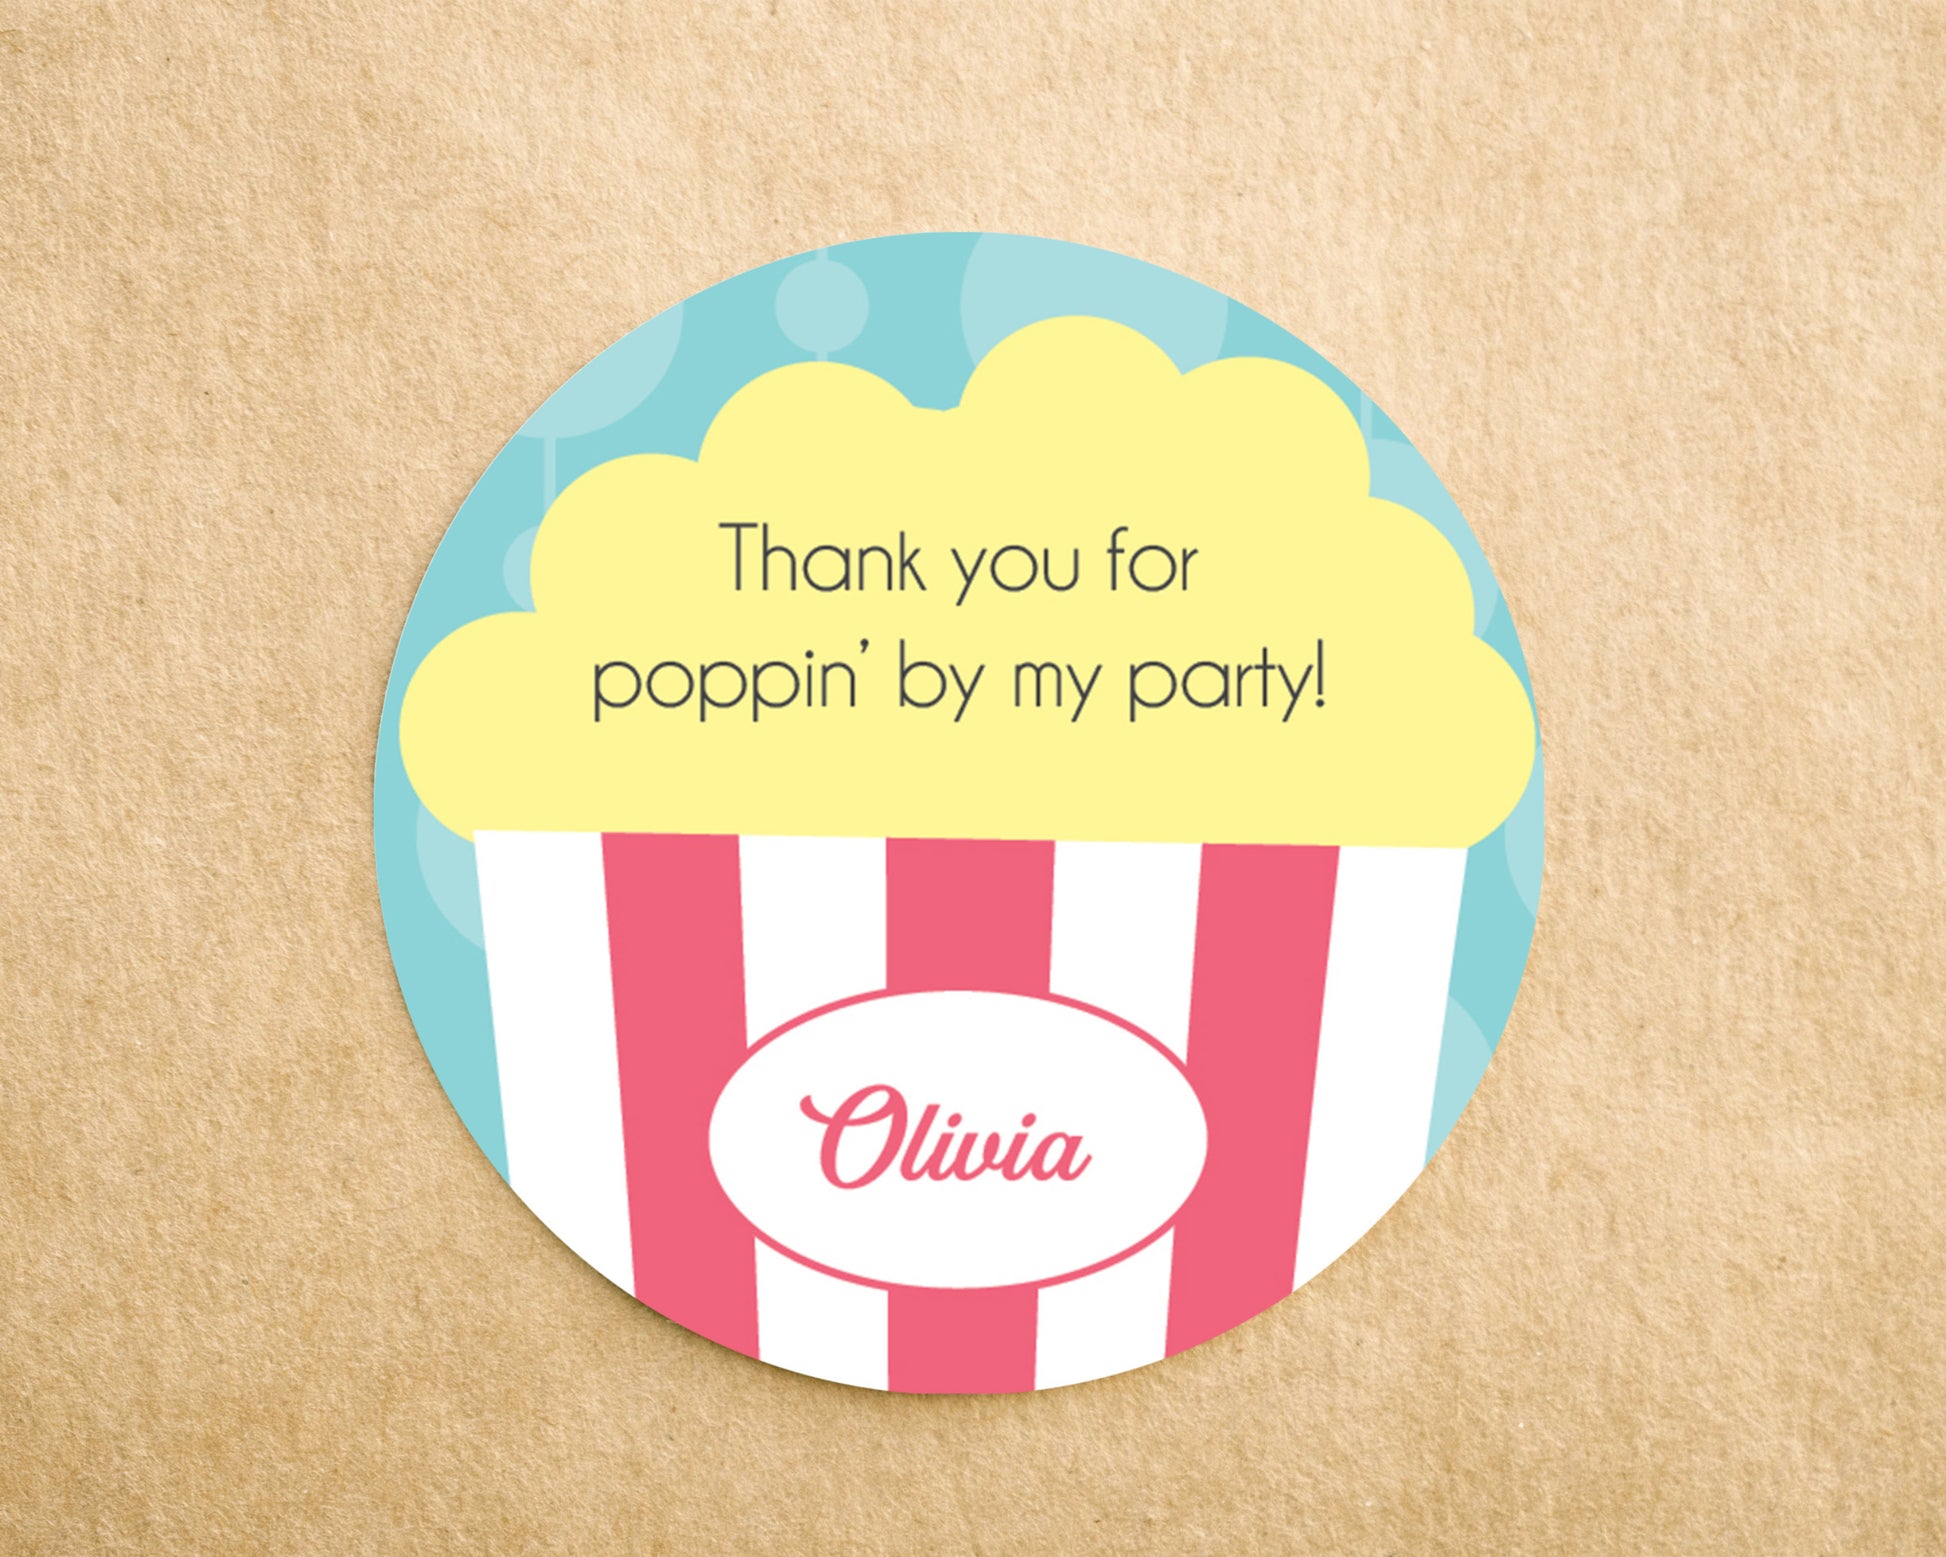 Thank you for poppin' by label